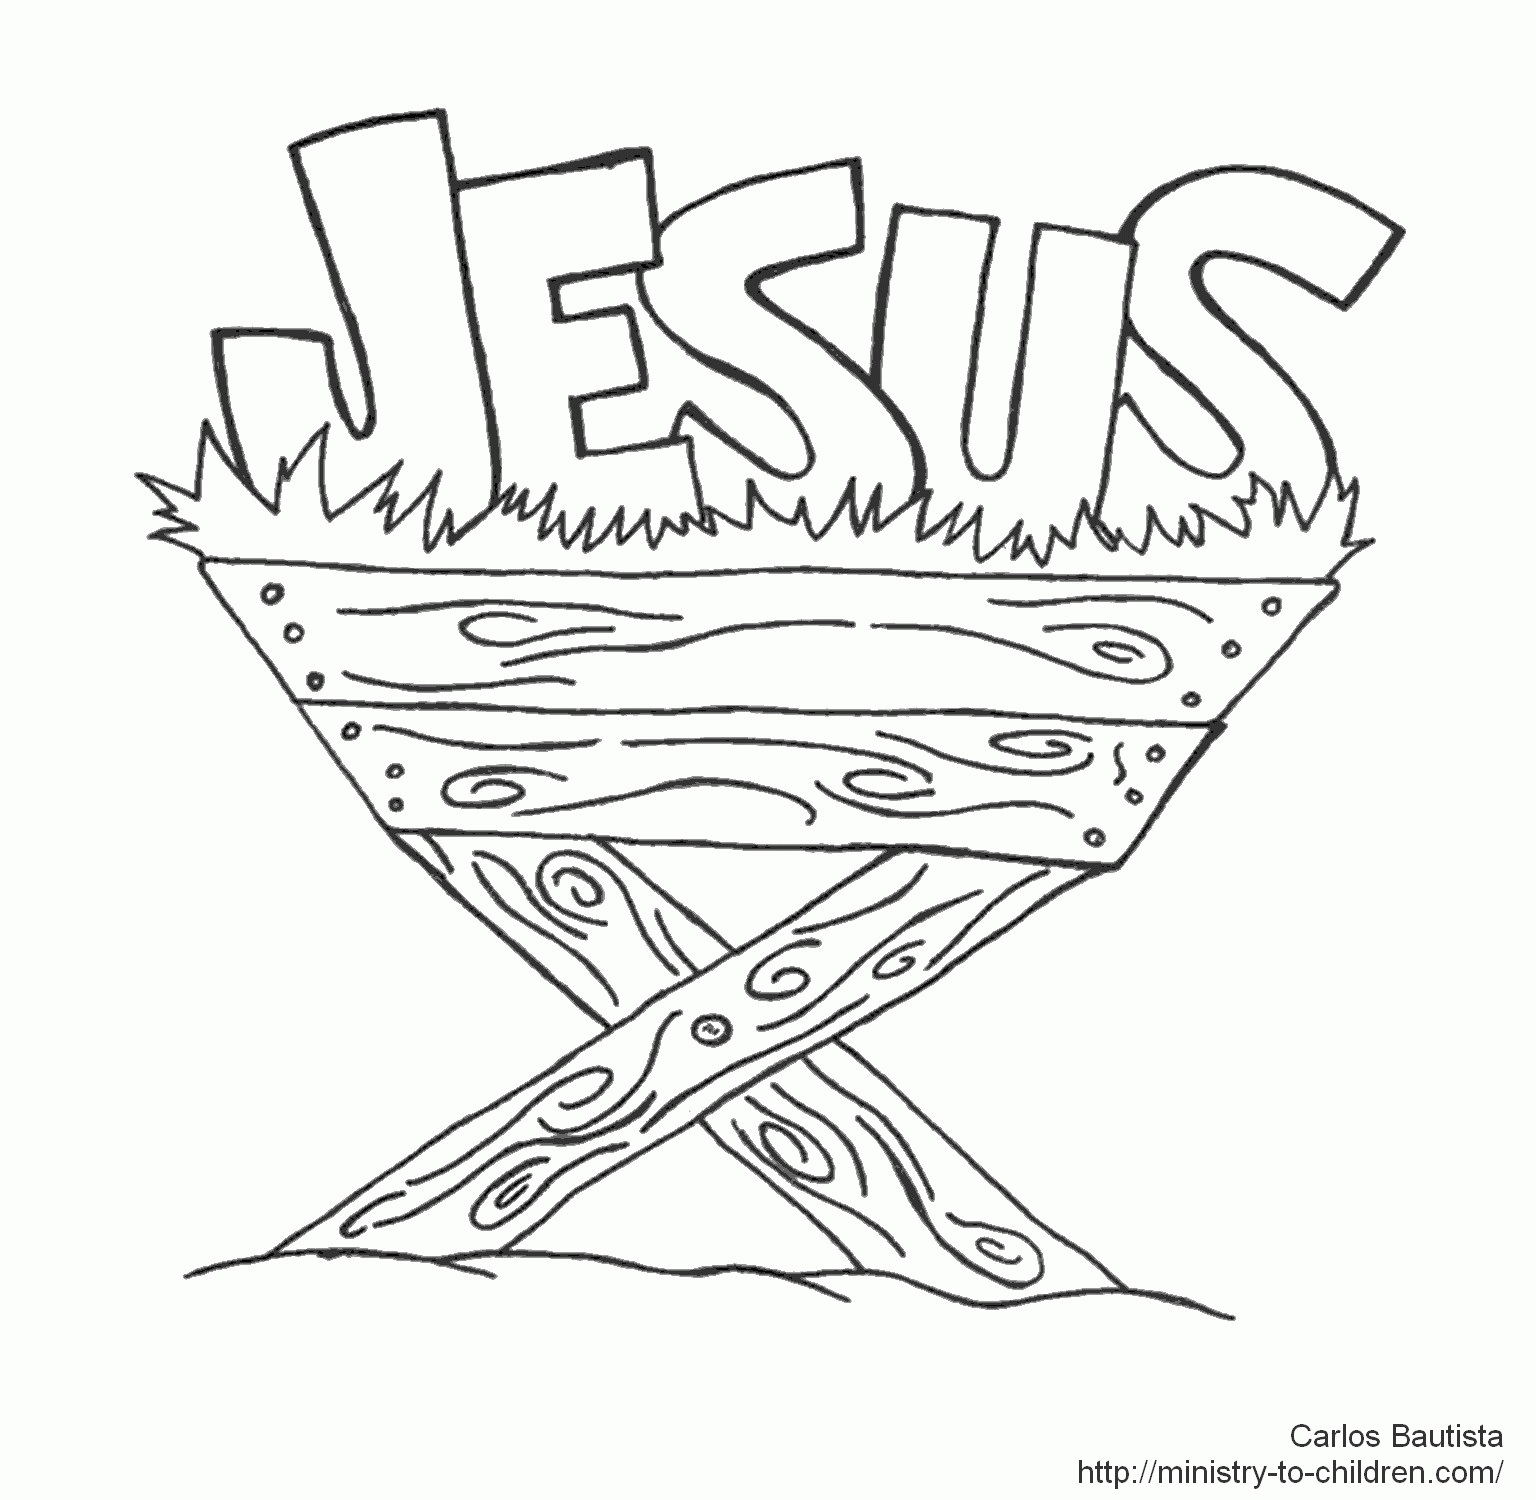 Blood Jesus Coloring Page - Coloring Pages For All Ages